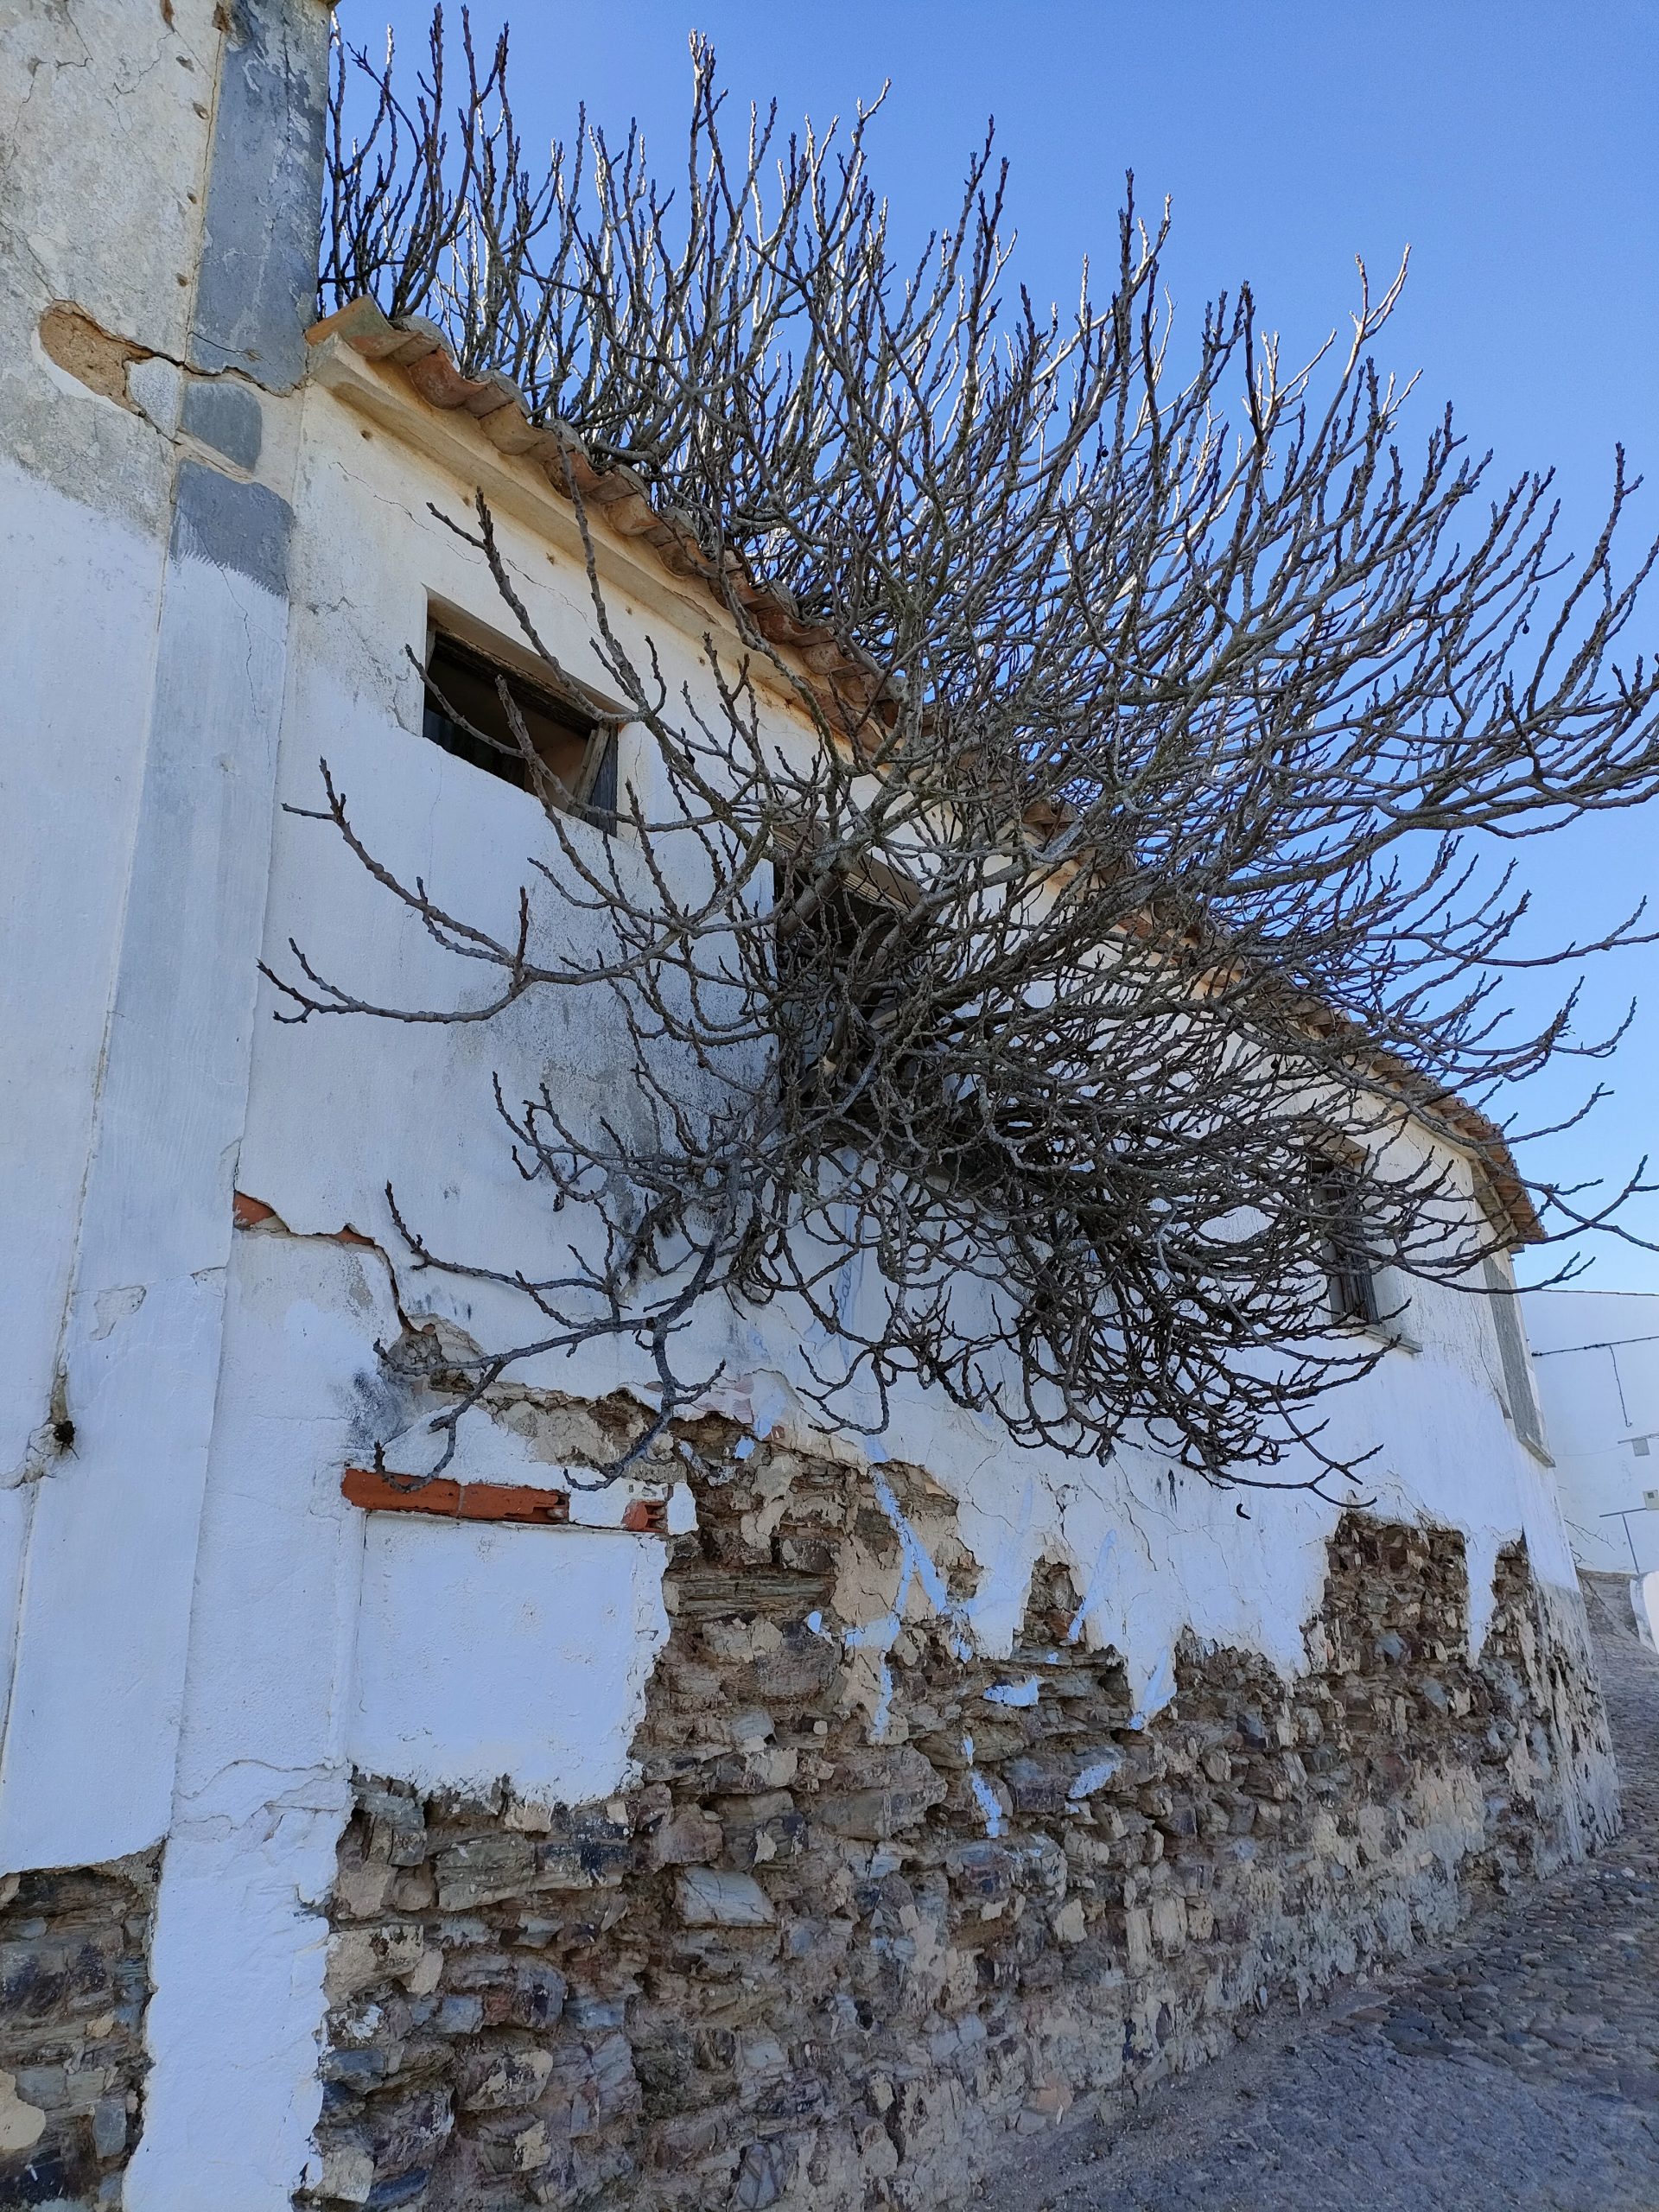 Bushes growing out an old house in Aljezur